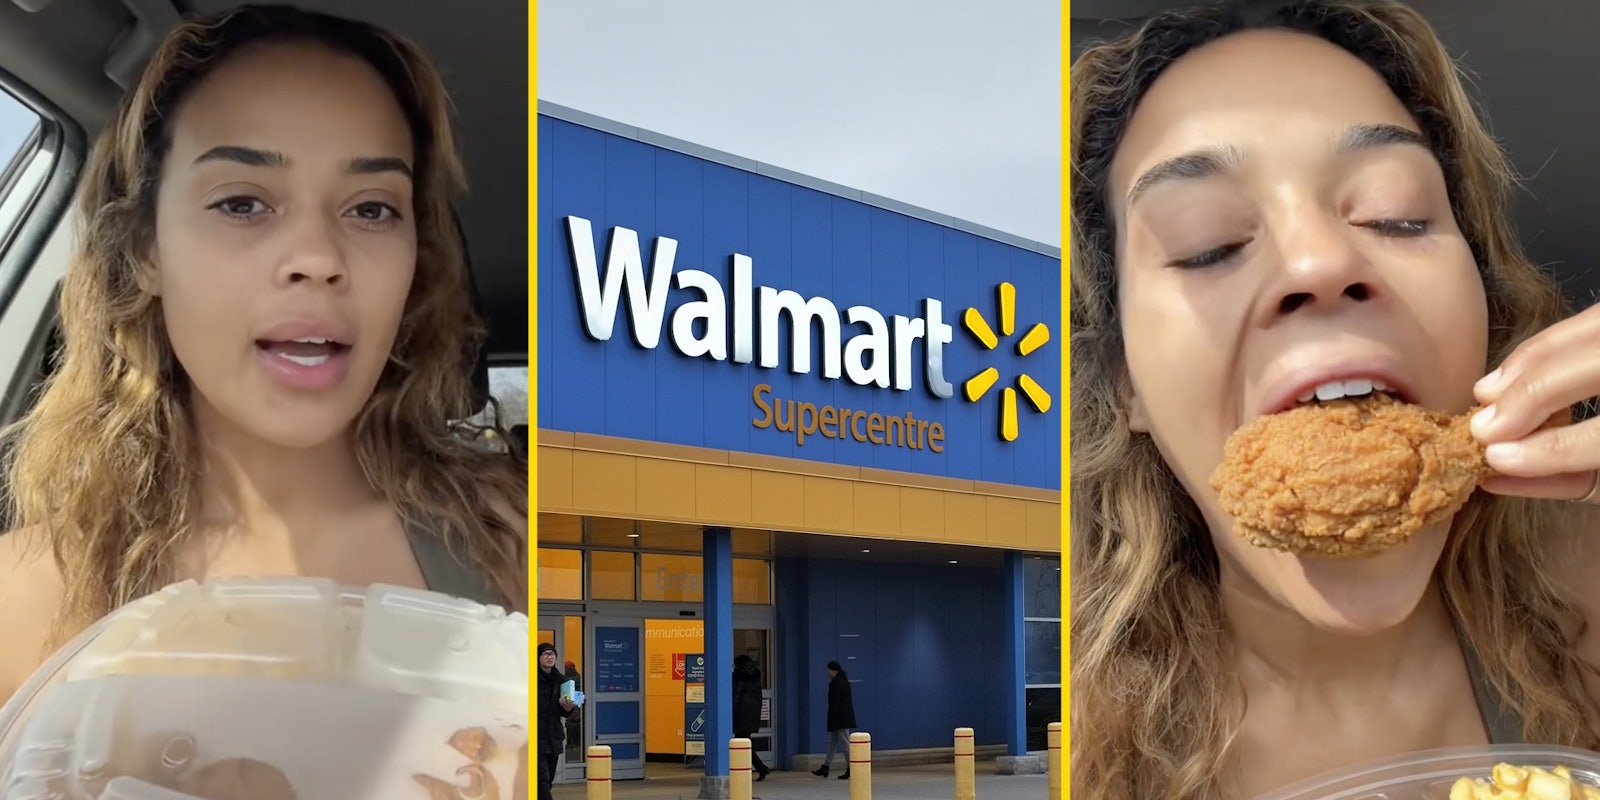 Woman with container(l), Walmart storefront(c), Woman eating chicken(r)